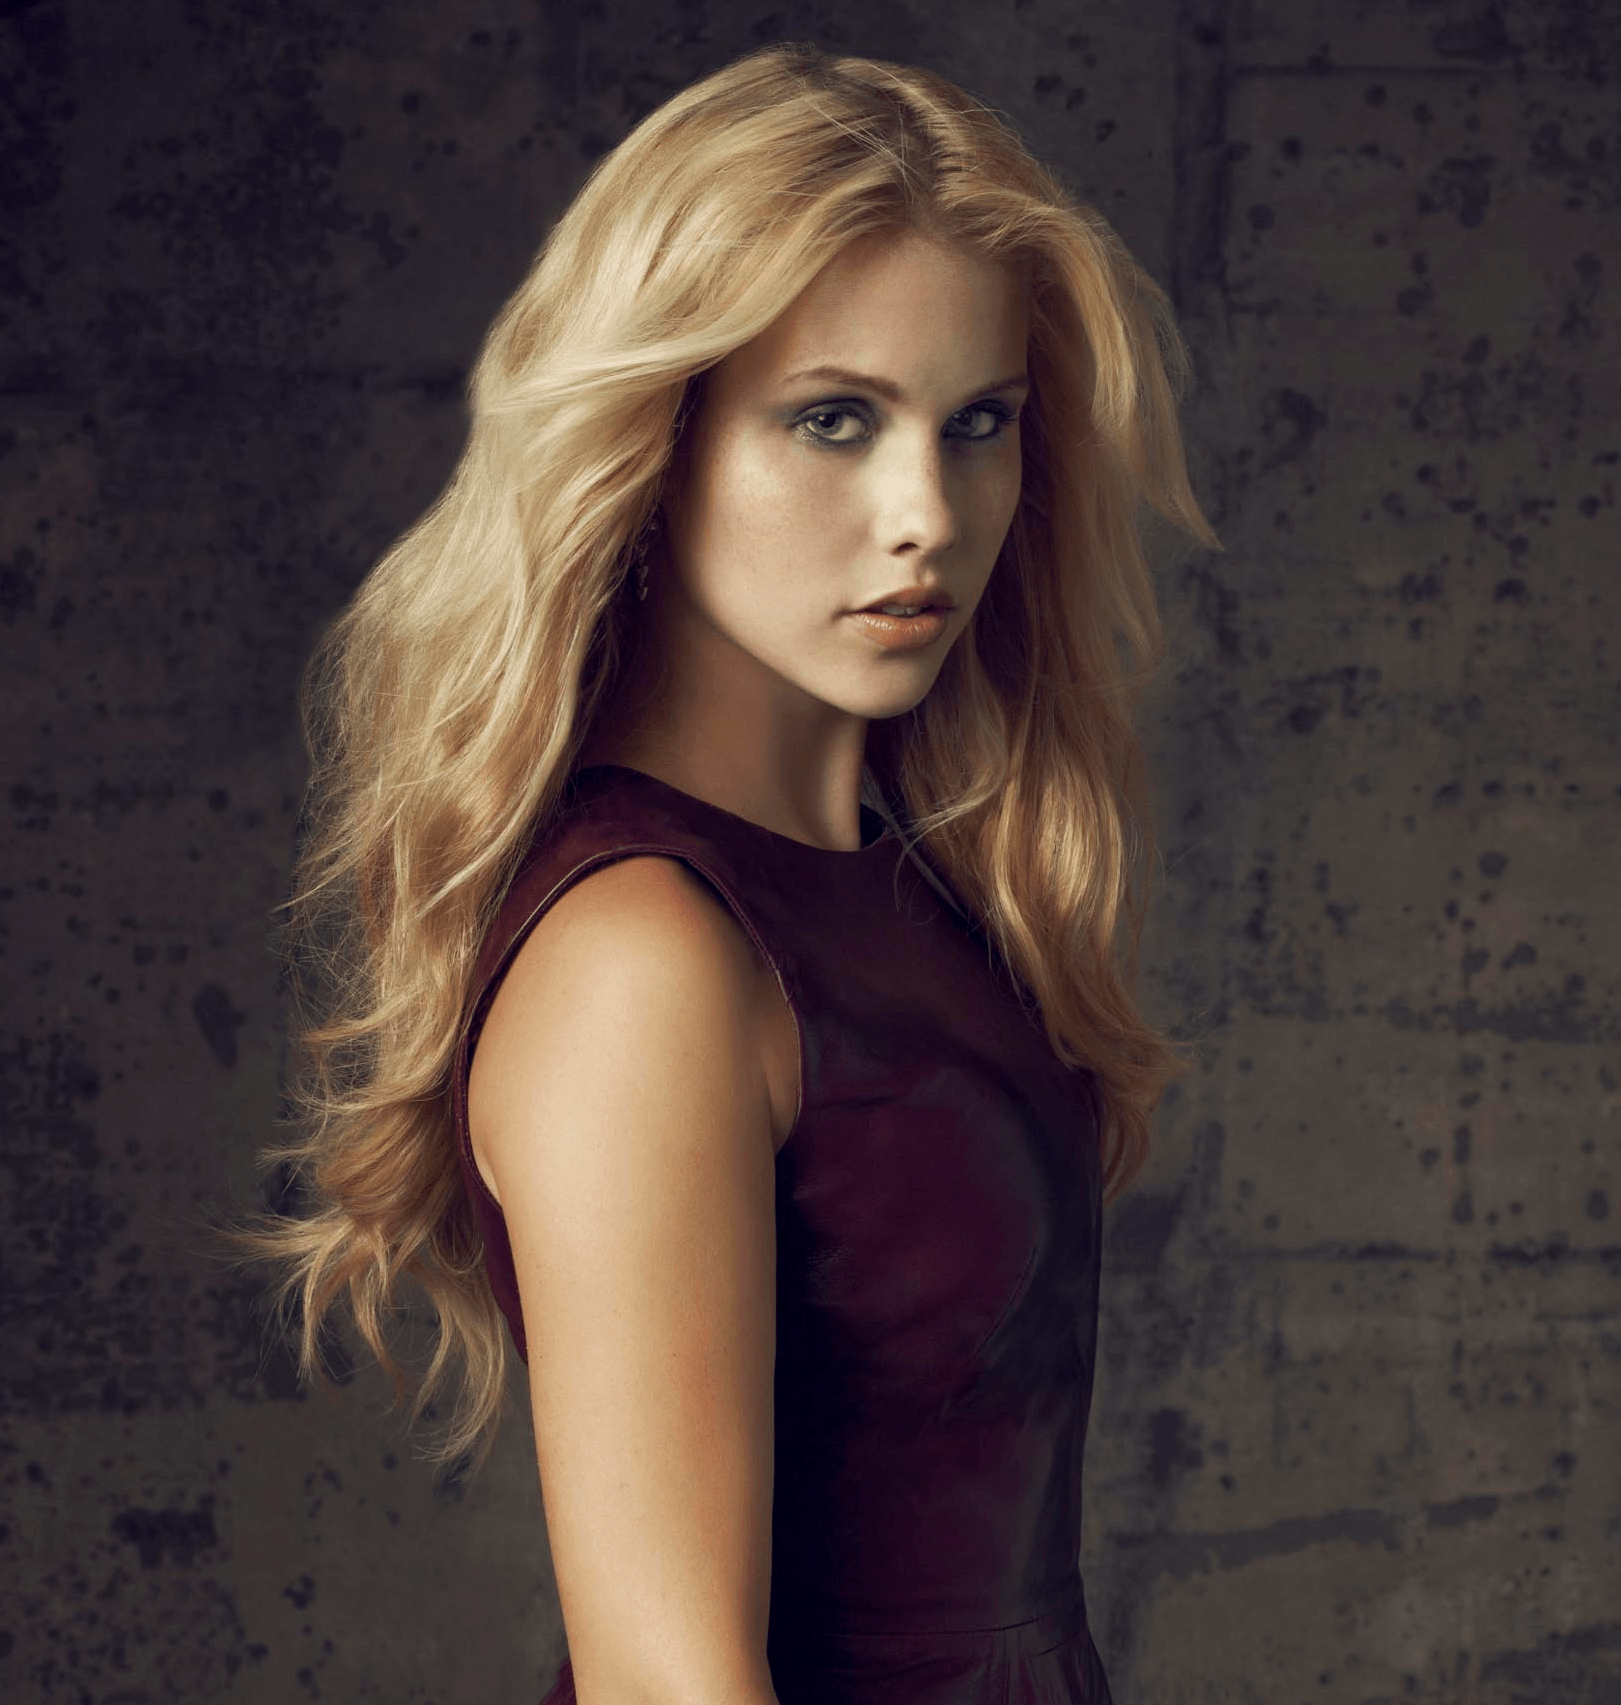 Rebekah Mikaelson Appearance. The Vampire Diaries